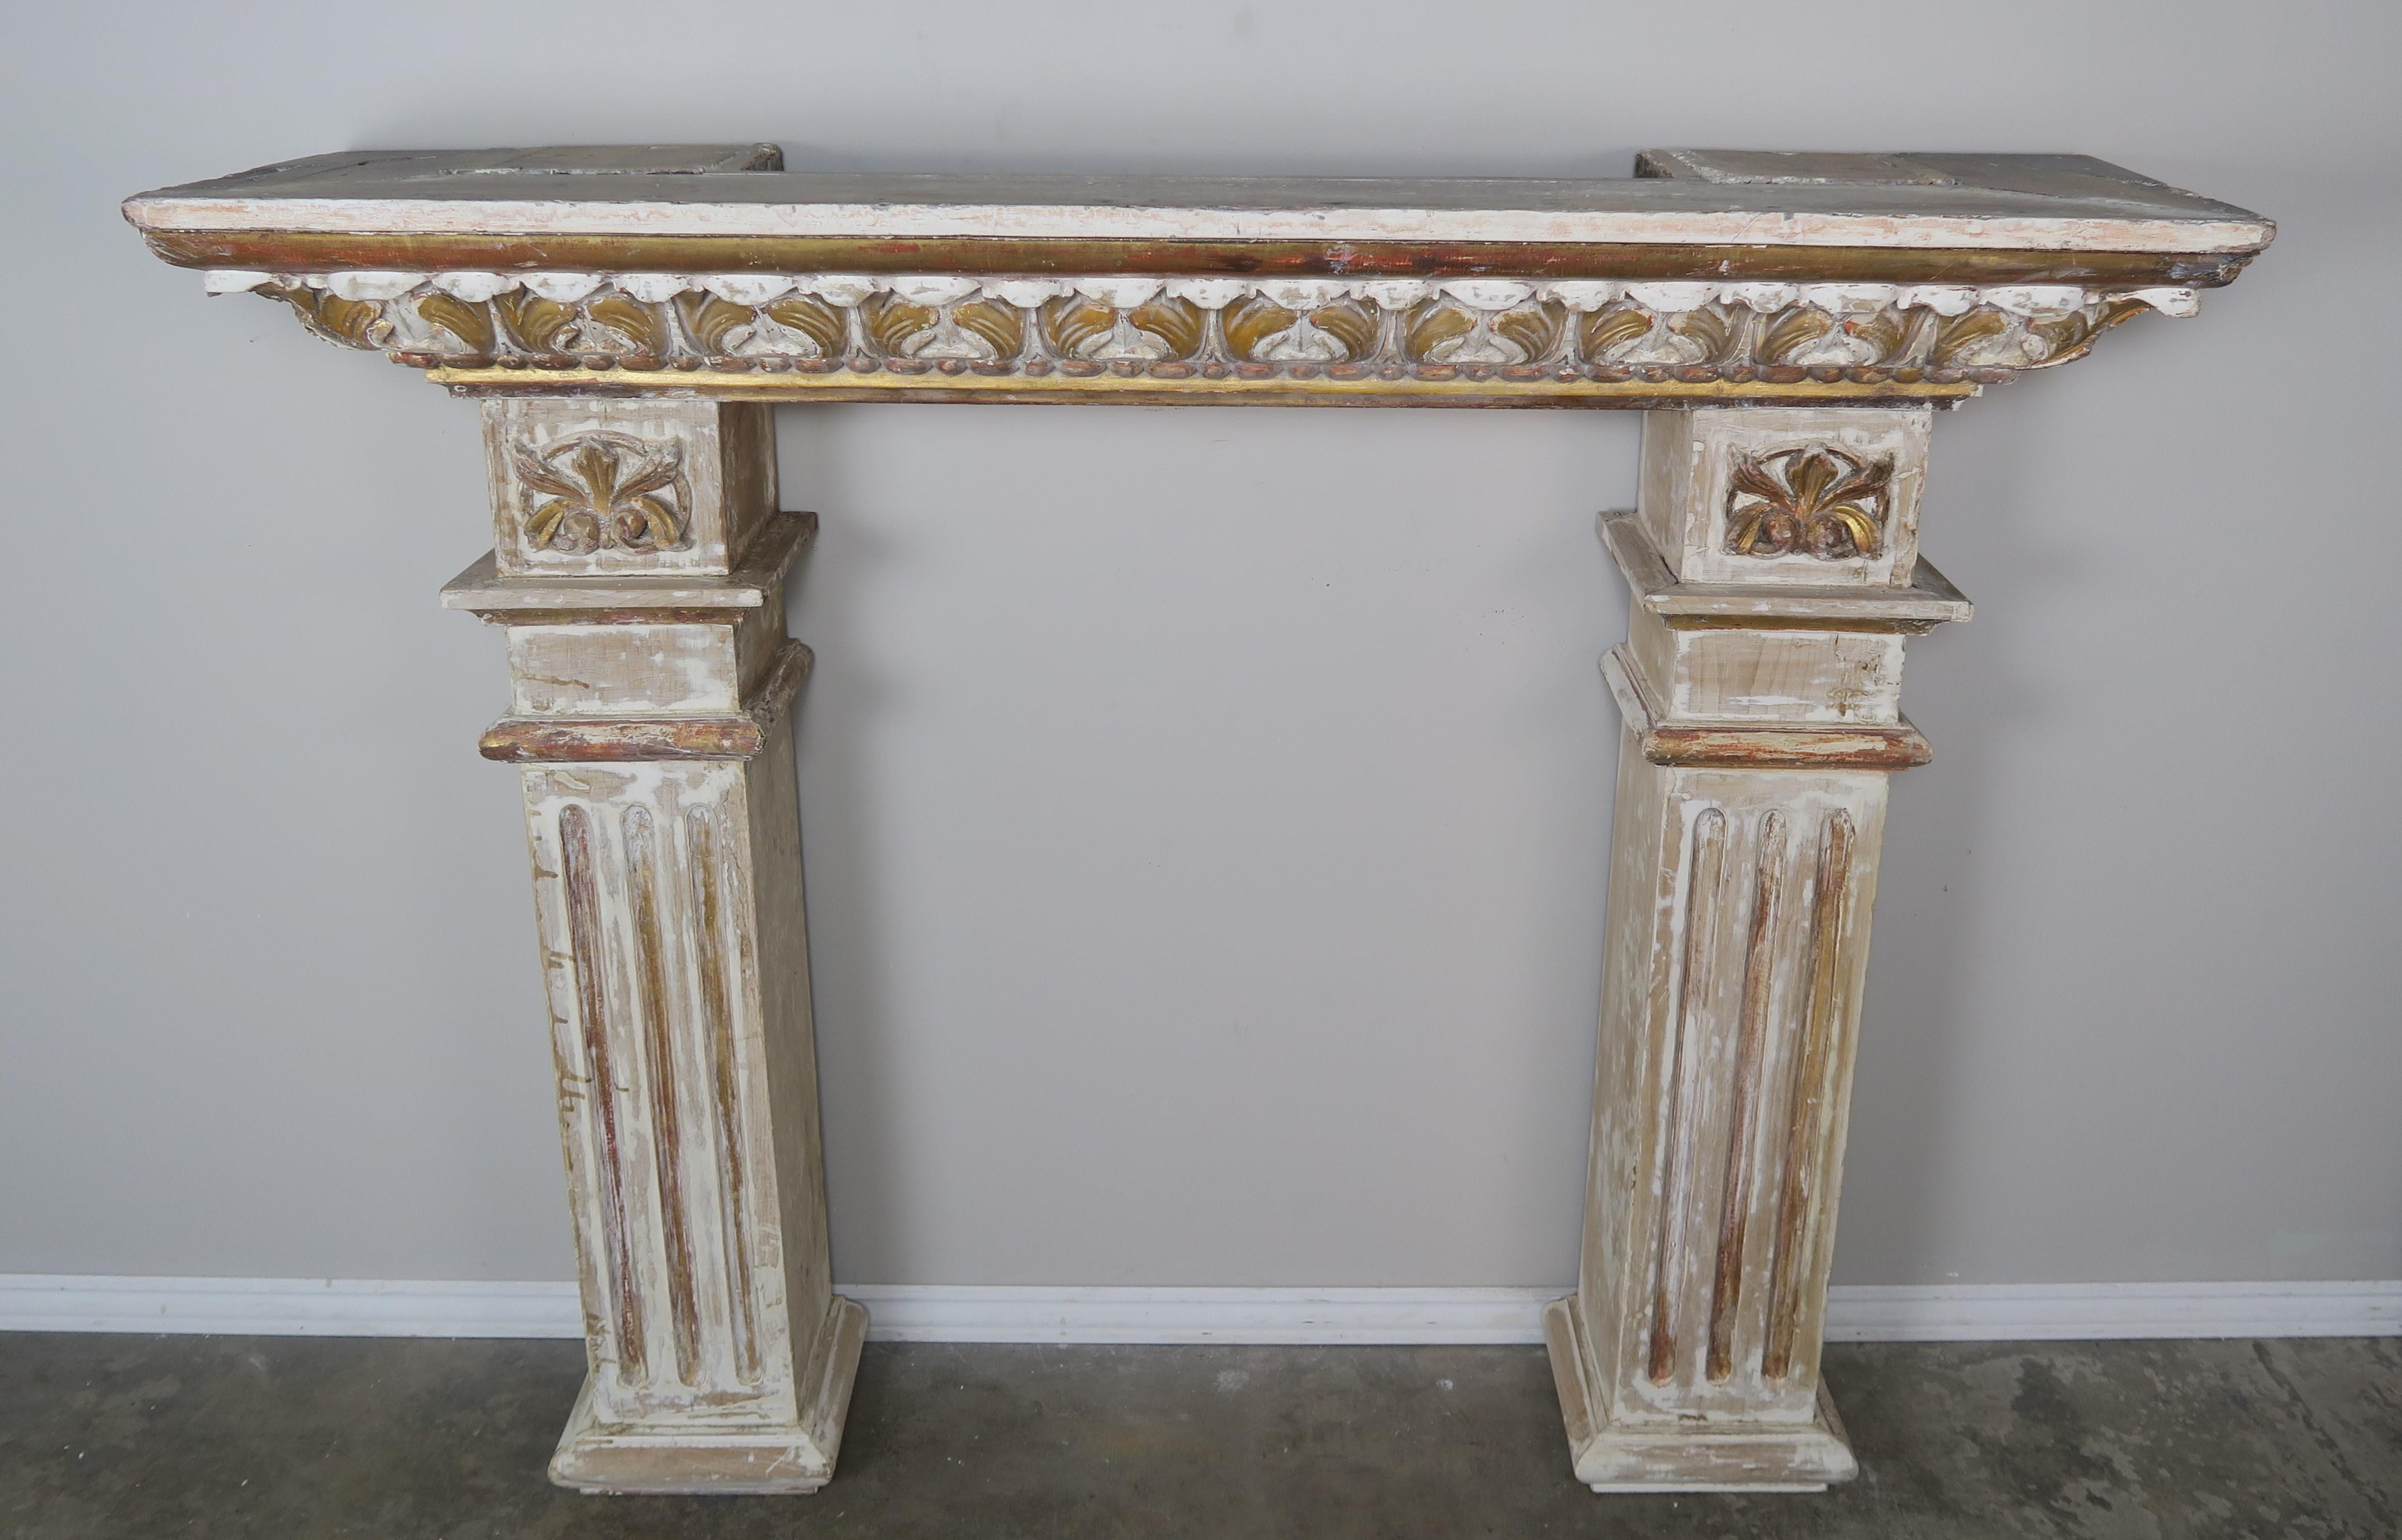 Neoclassical 19th Century Italian Painted and Parcel Gilt Fireplace Mantel